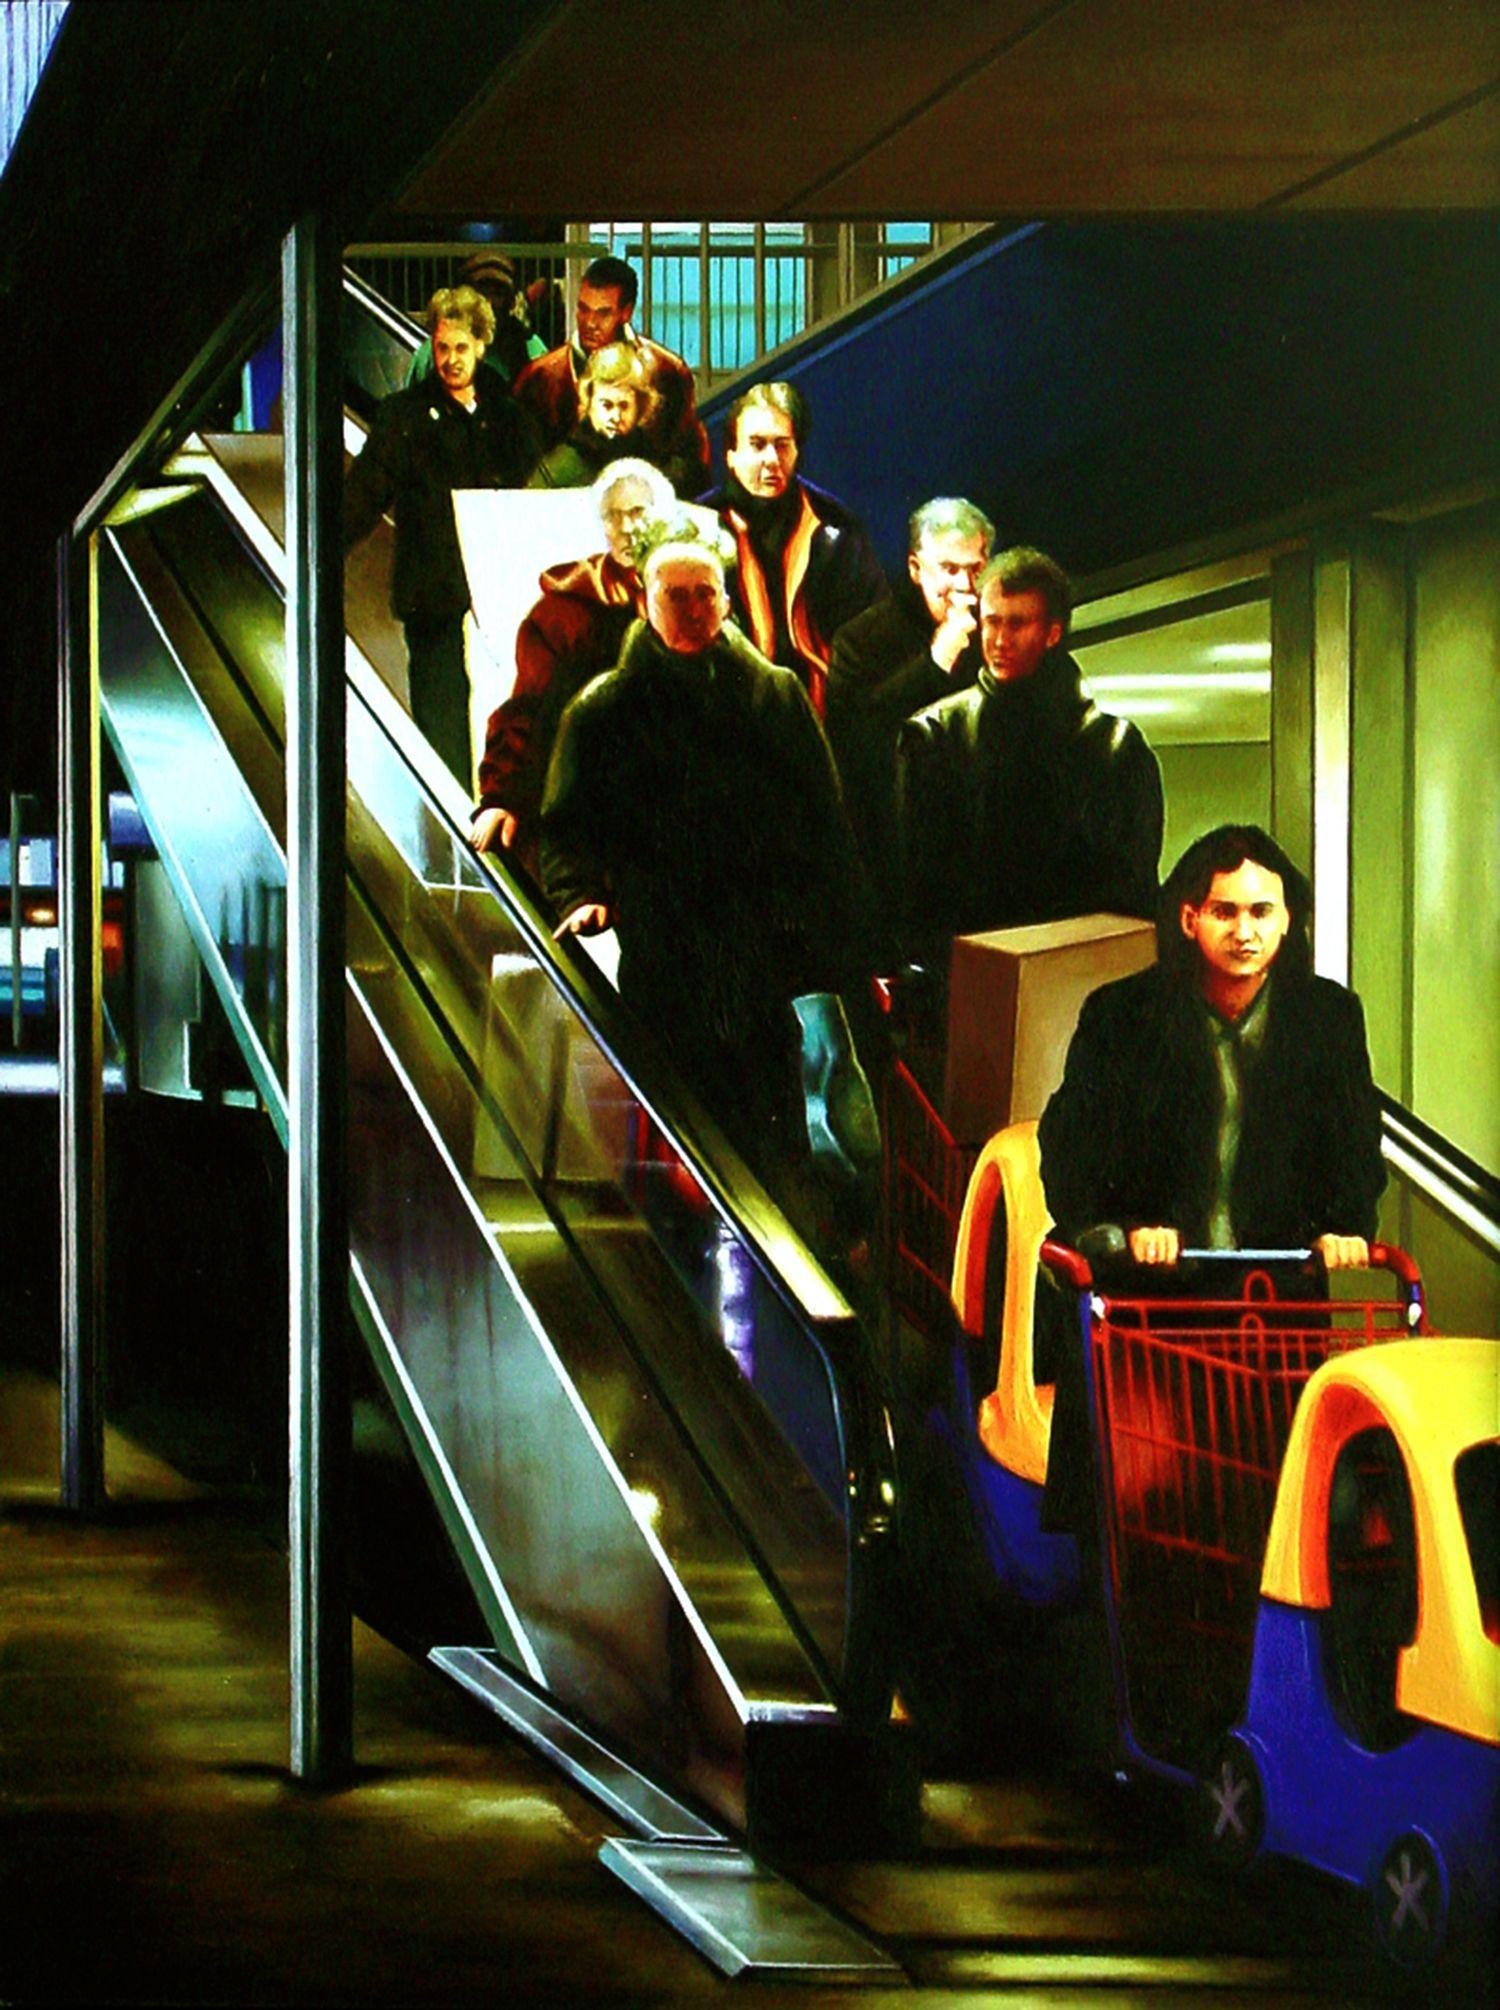 One day I visited the Ikea store in Groningen, The Netherlands where I saw these people leaving the store by escalator with all the stuff they just bought. Somehow I thought the scene was quite dramatic so I decided to paint it. :: Painting ::